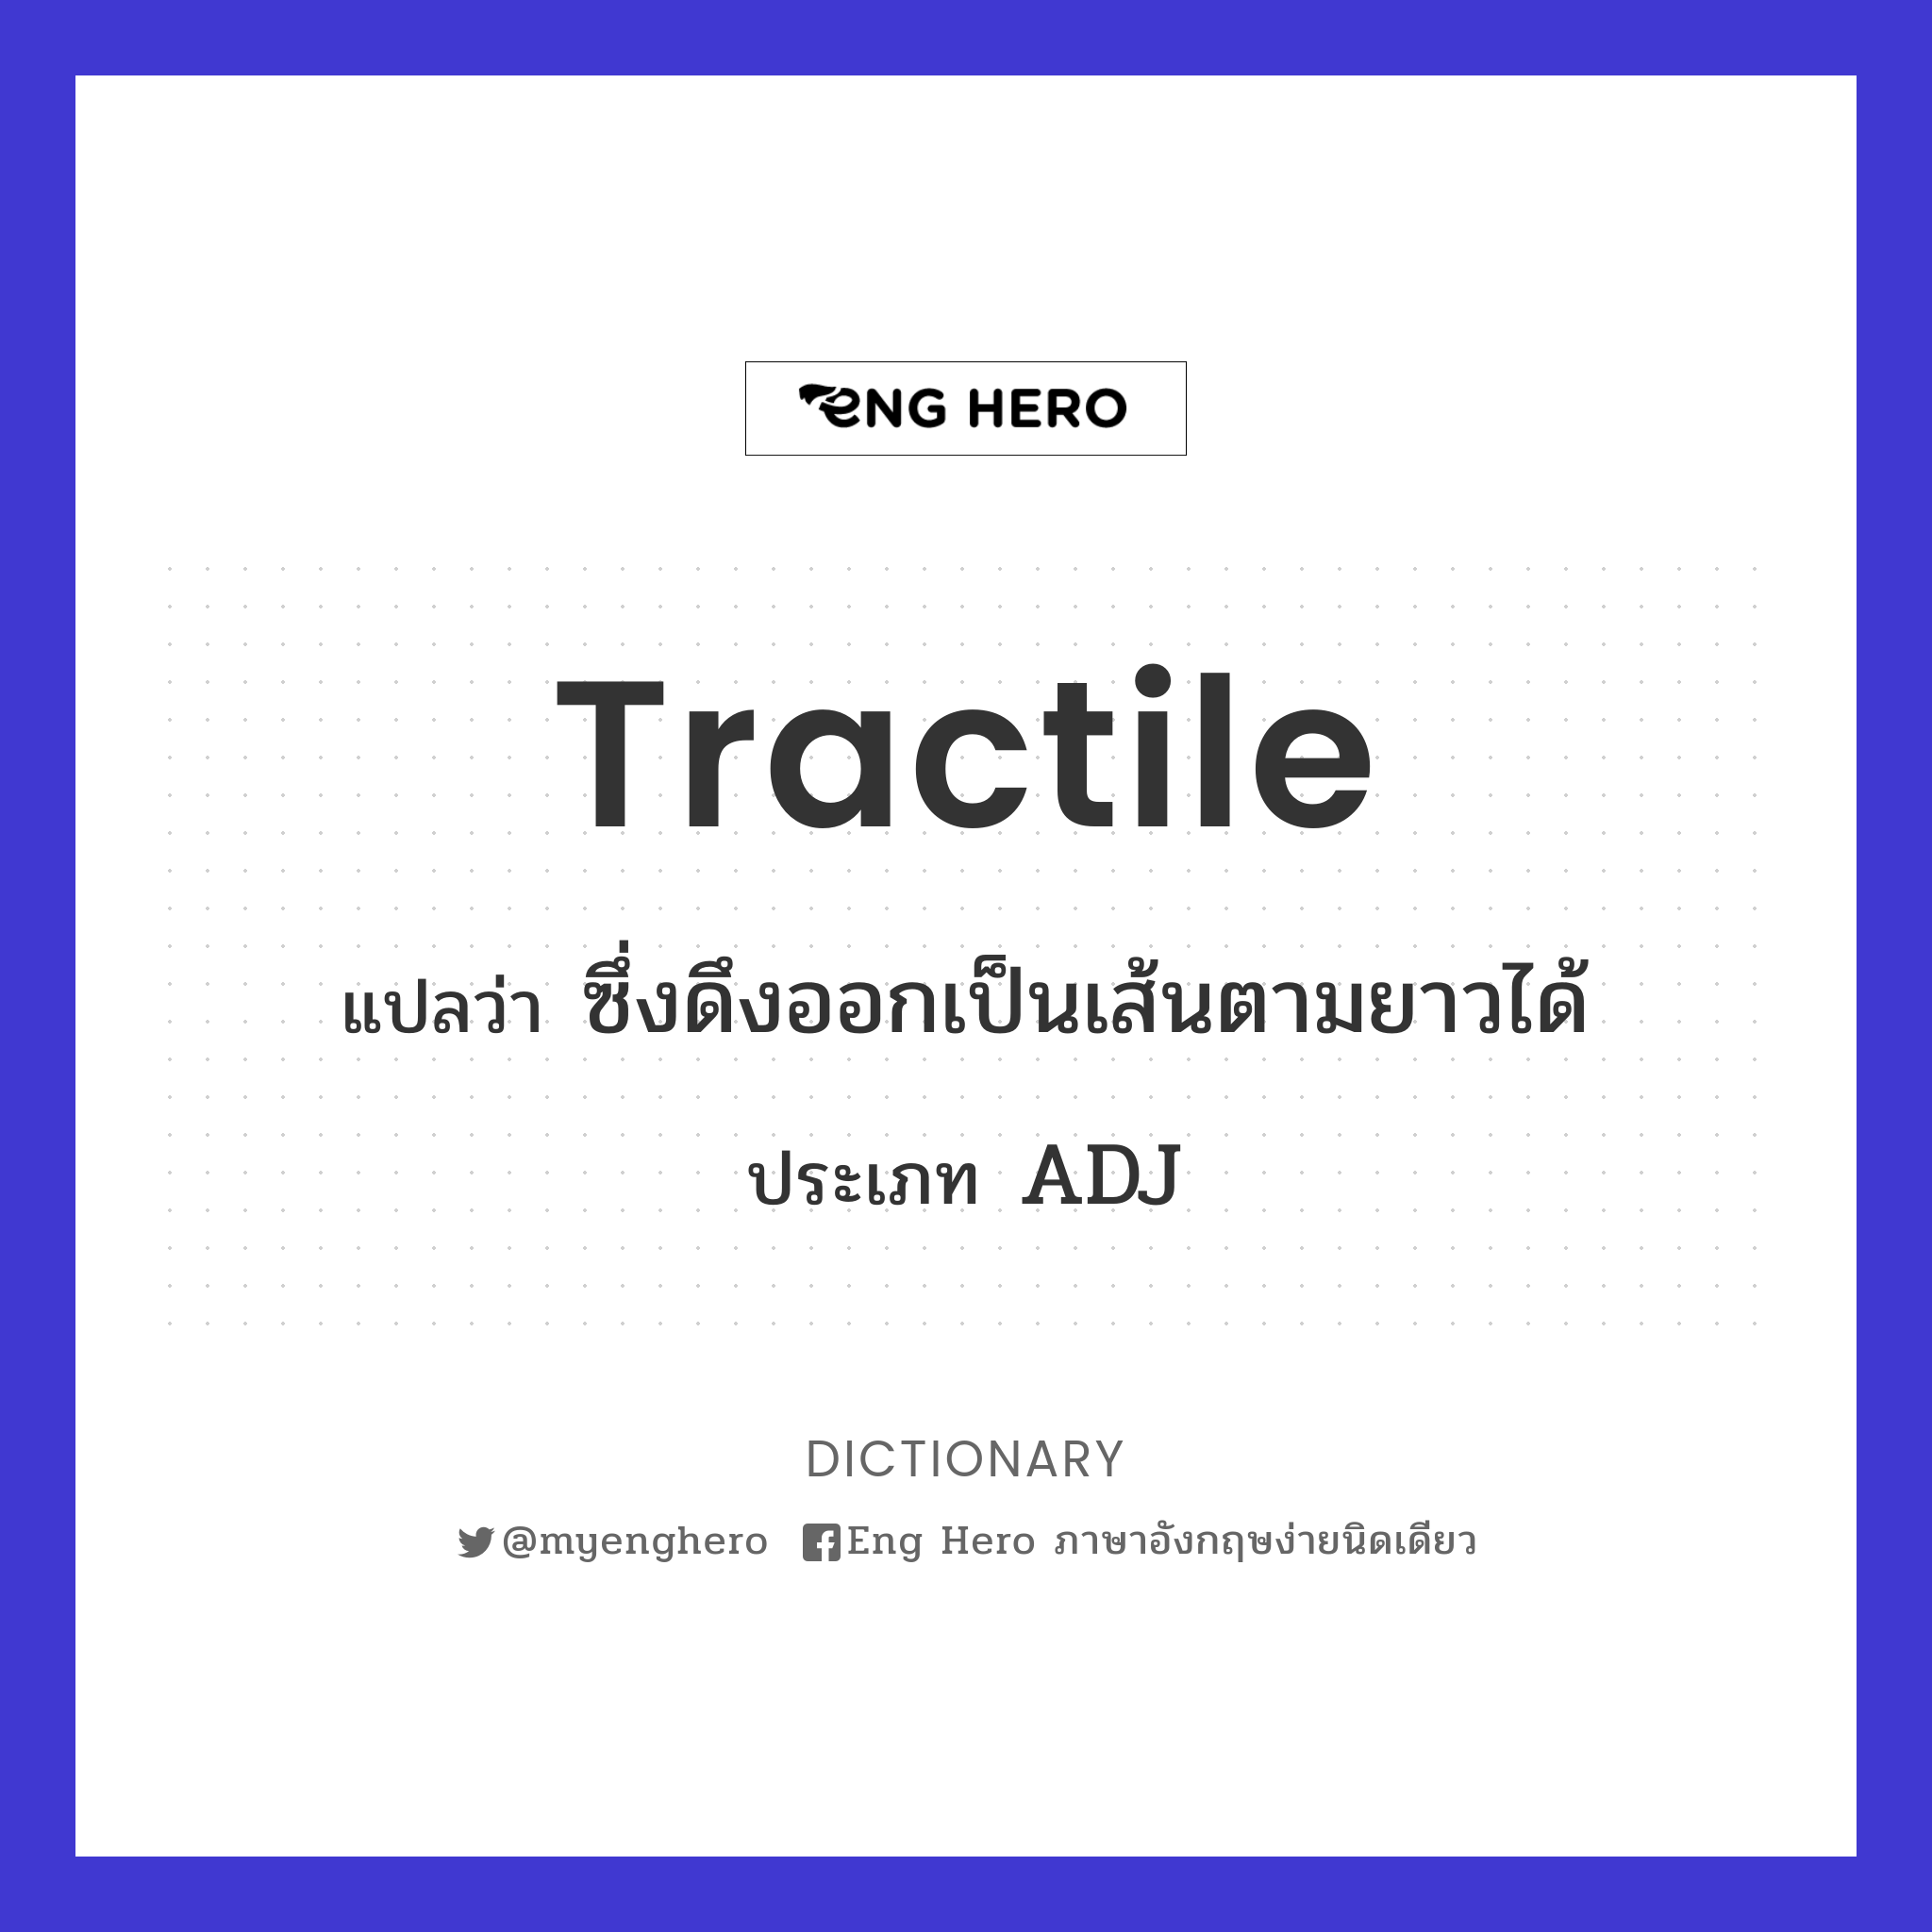 tractile